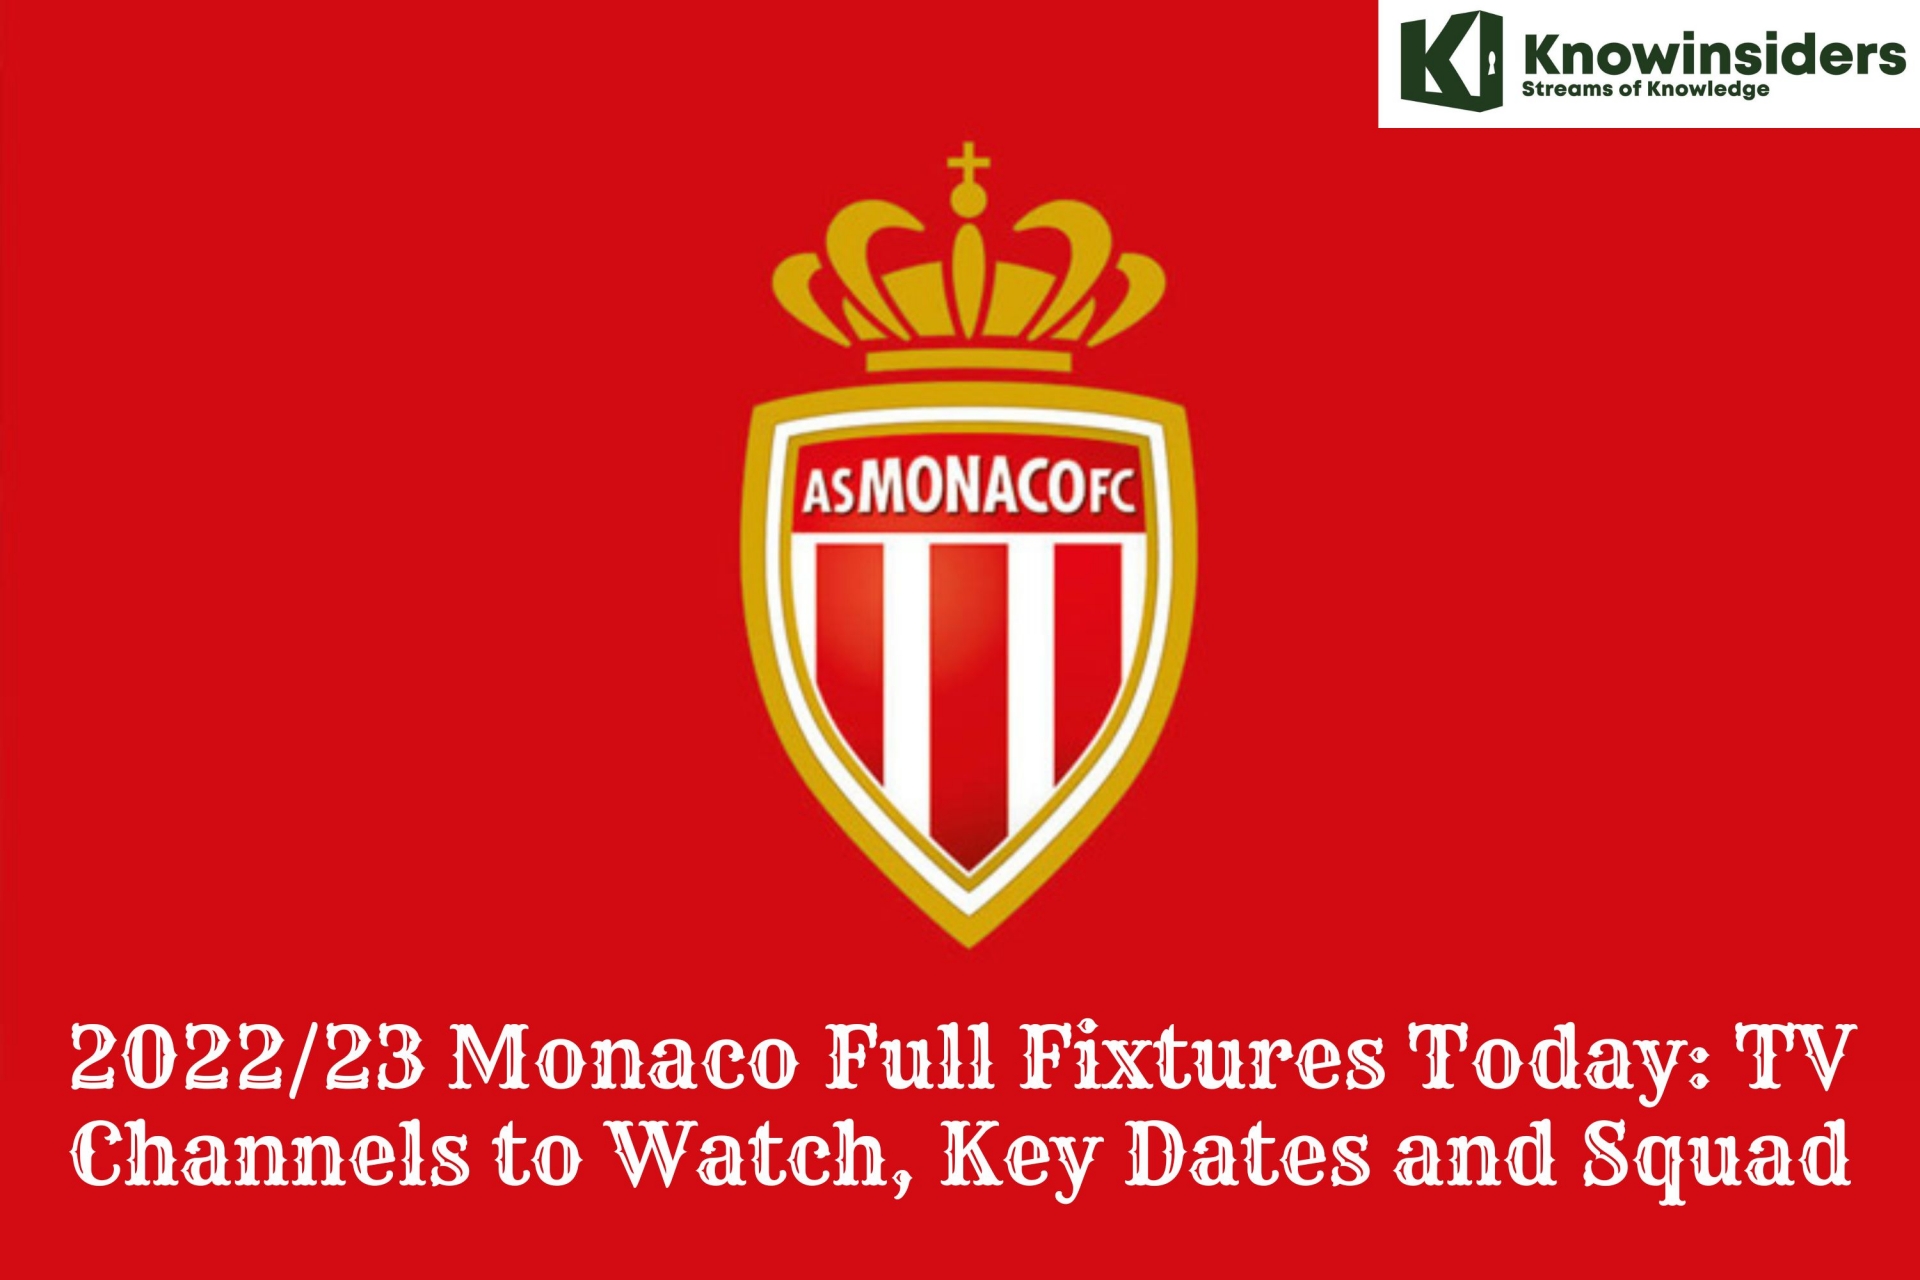 2022/23 Monaco Full Fixtures Today: TV Channels to Watch, Key Dates and Squad